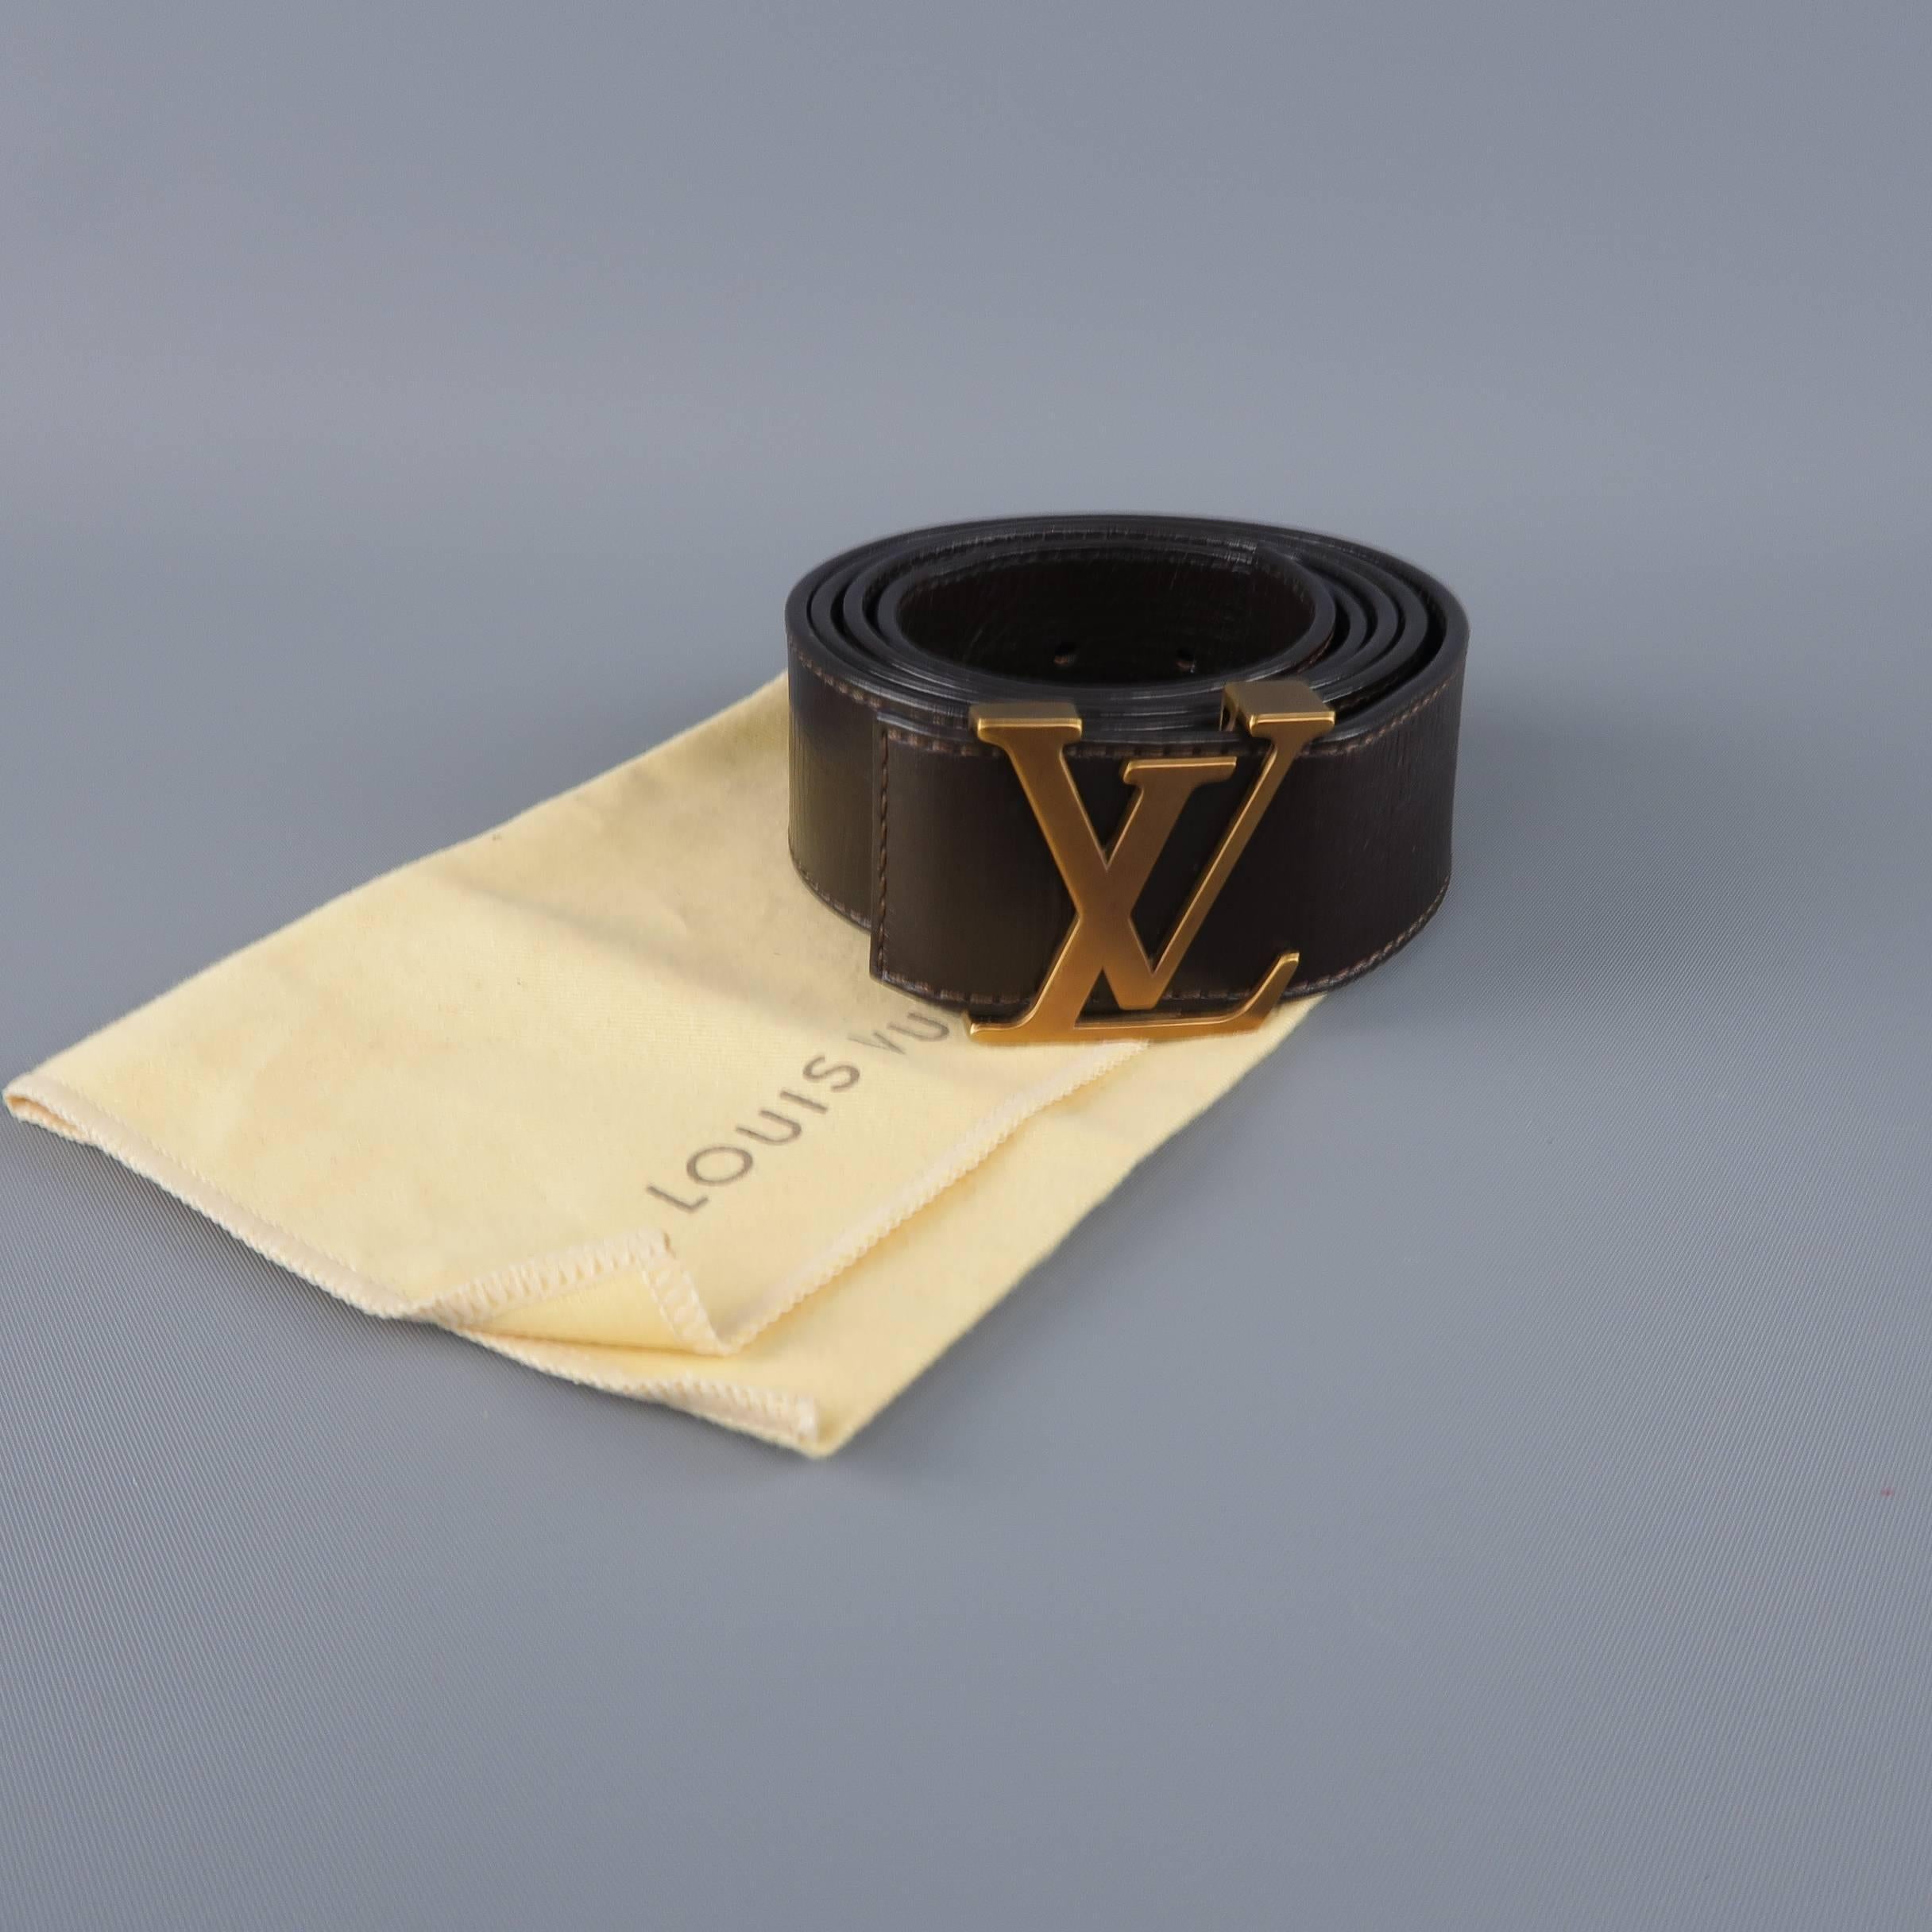 Classic LOUIS VUITTON belt features a thick chocolate brown Utah leather strap with dark antique gold tone brass LV monogram buckle. With dust bag. Made in Spain.
 
Excellent Pre-Owned Condition.
Marked: 110/44
 
Length: 50 in.
Width: 1.5 in.
Fits: